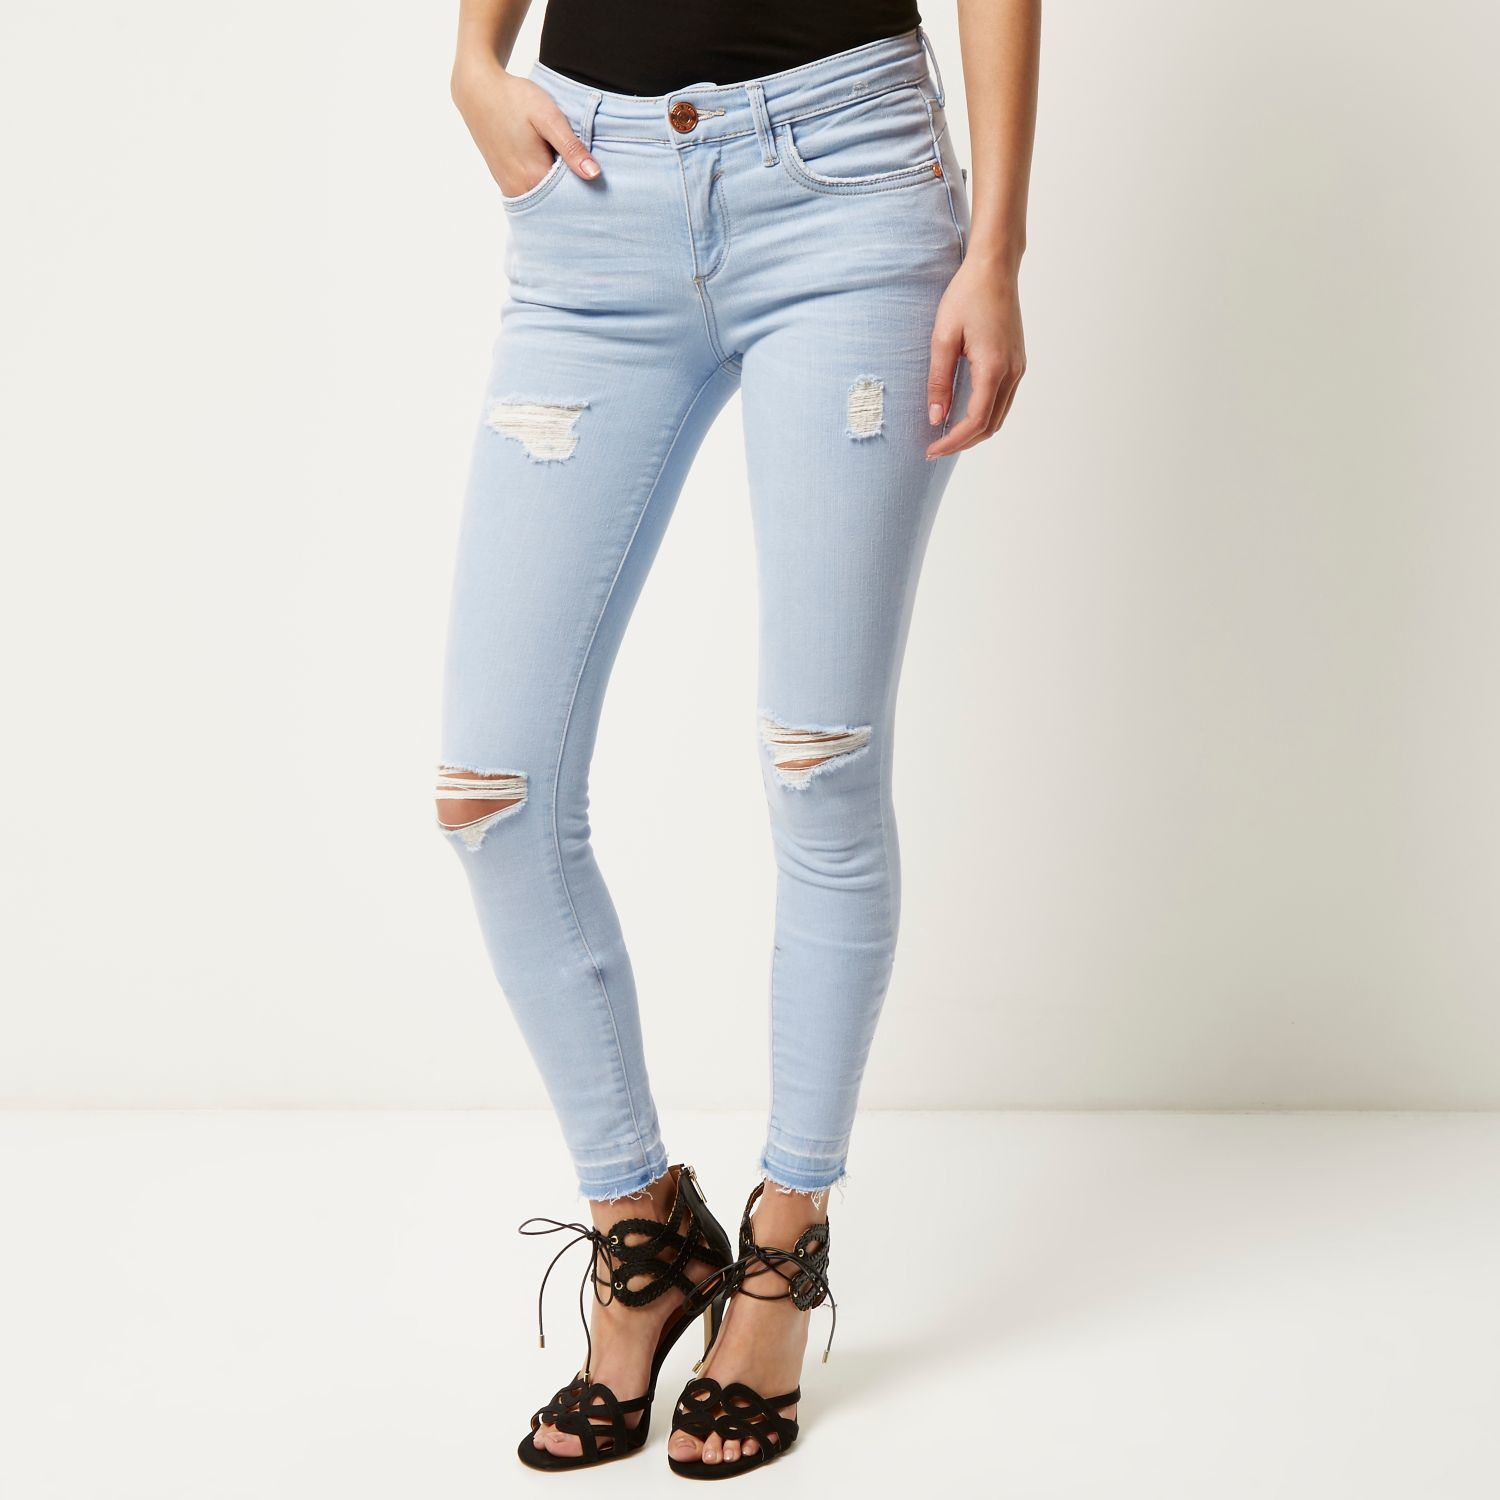 River Island Light Wash Ripped Amelie Super Skinny Jeans in Blue - Lyst